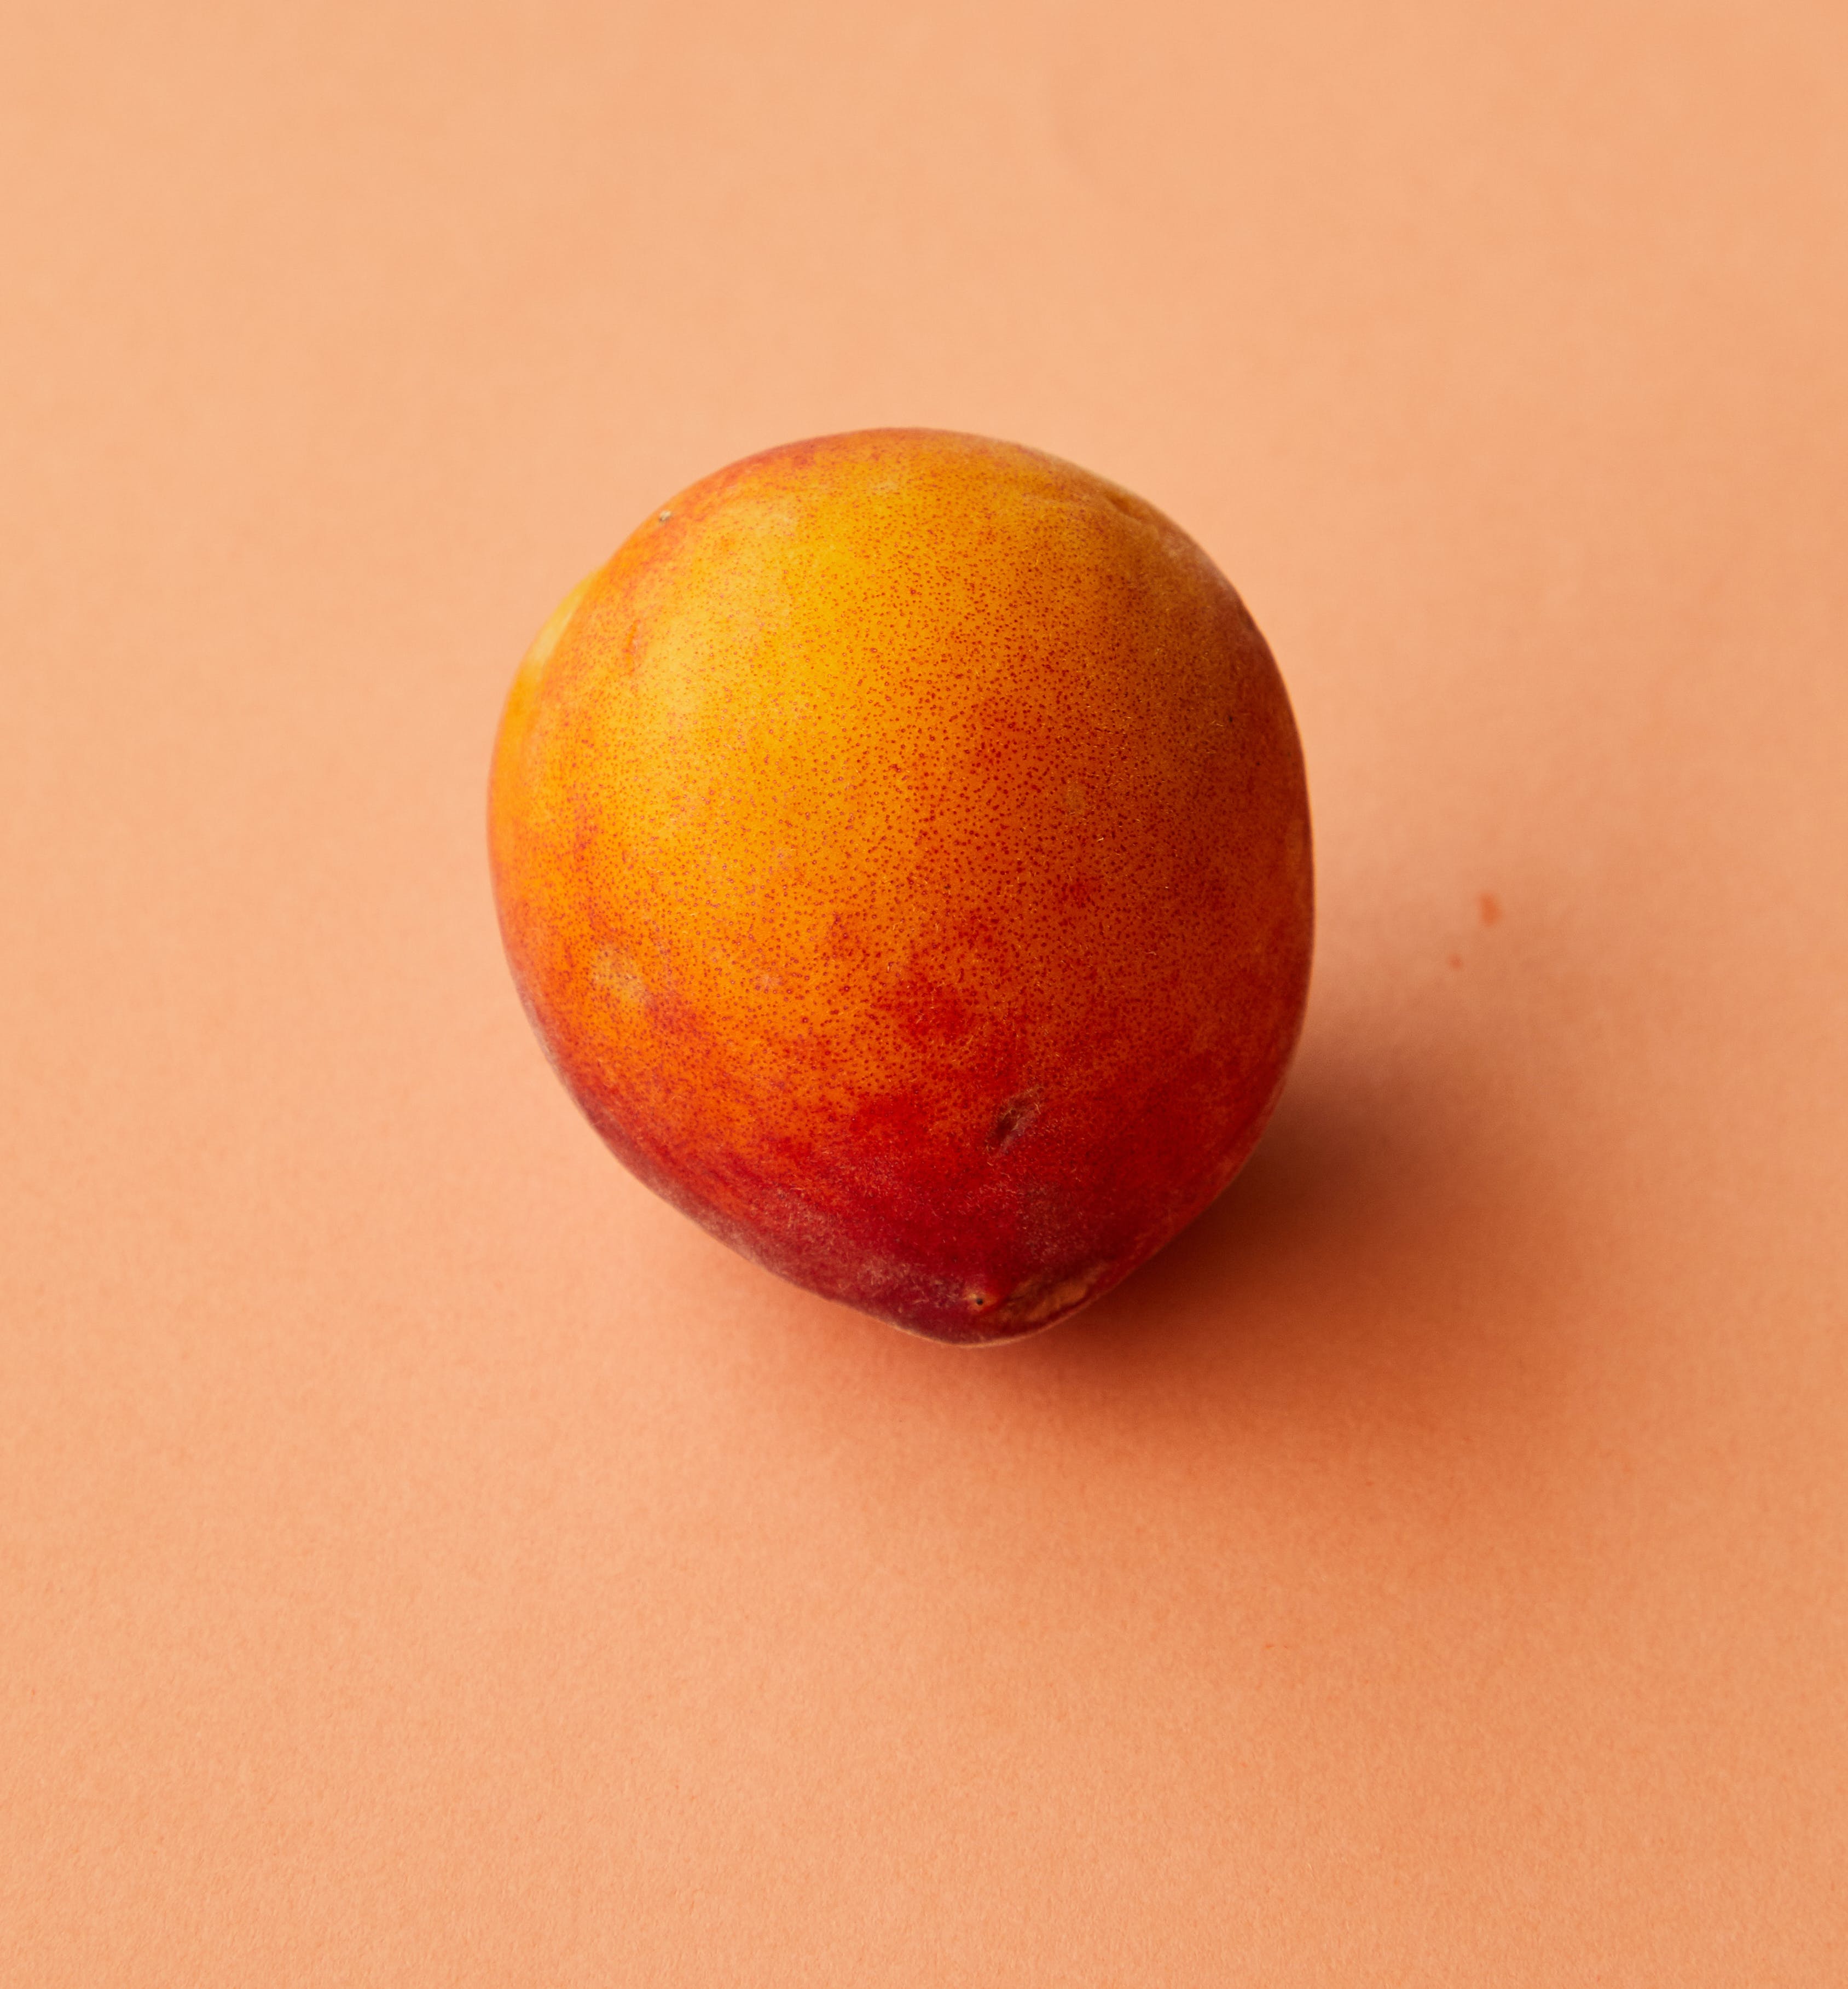 Peach Fuzz is the 2024 Pantone Color of the Year